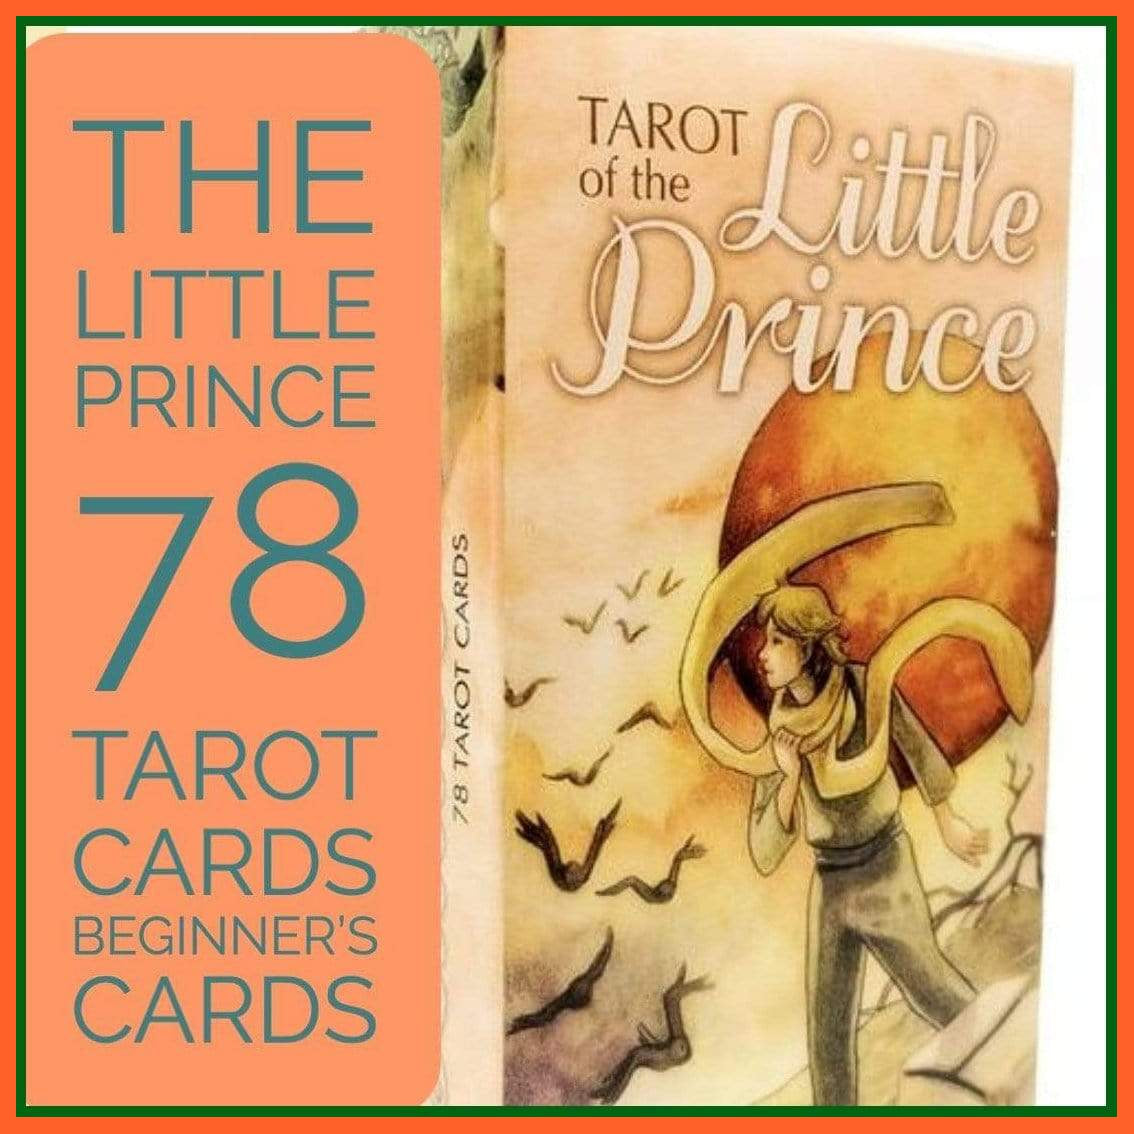 Tarot Cards Little Prince 78 Premium Cards For Beginners With Guide | whatagift.com.au.